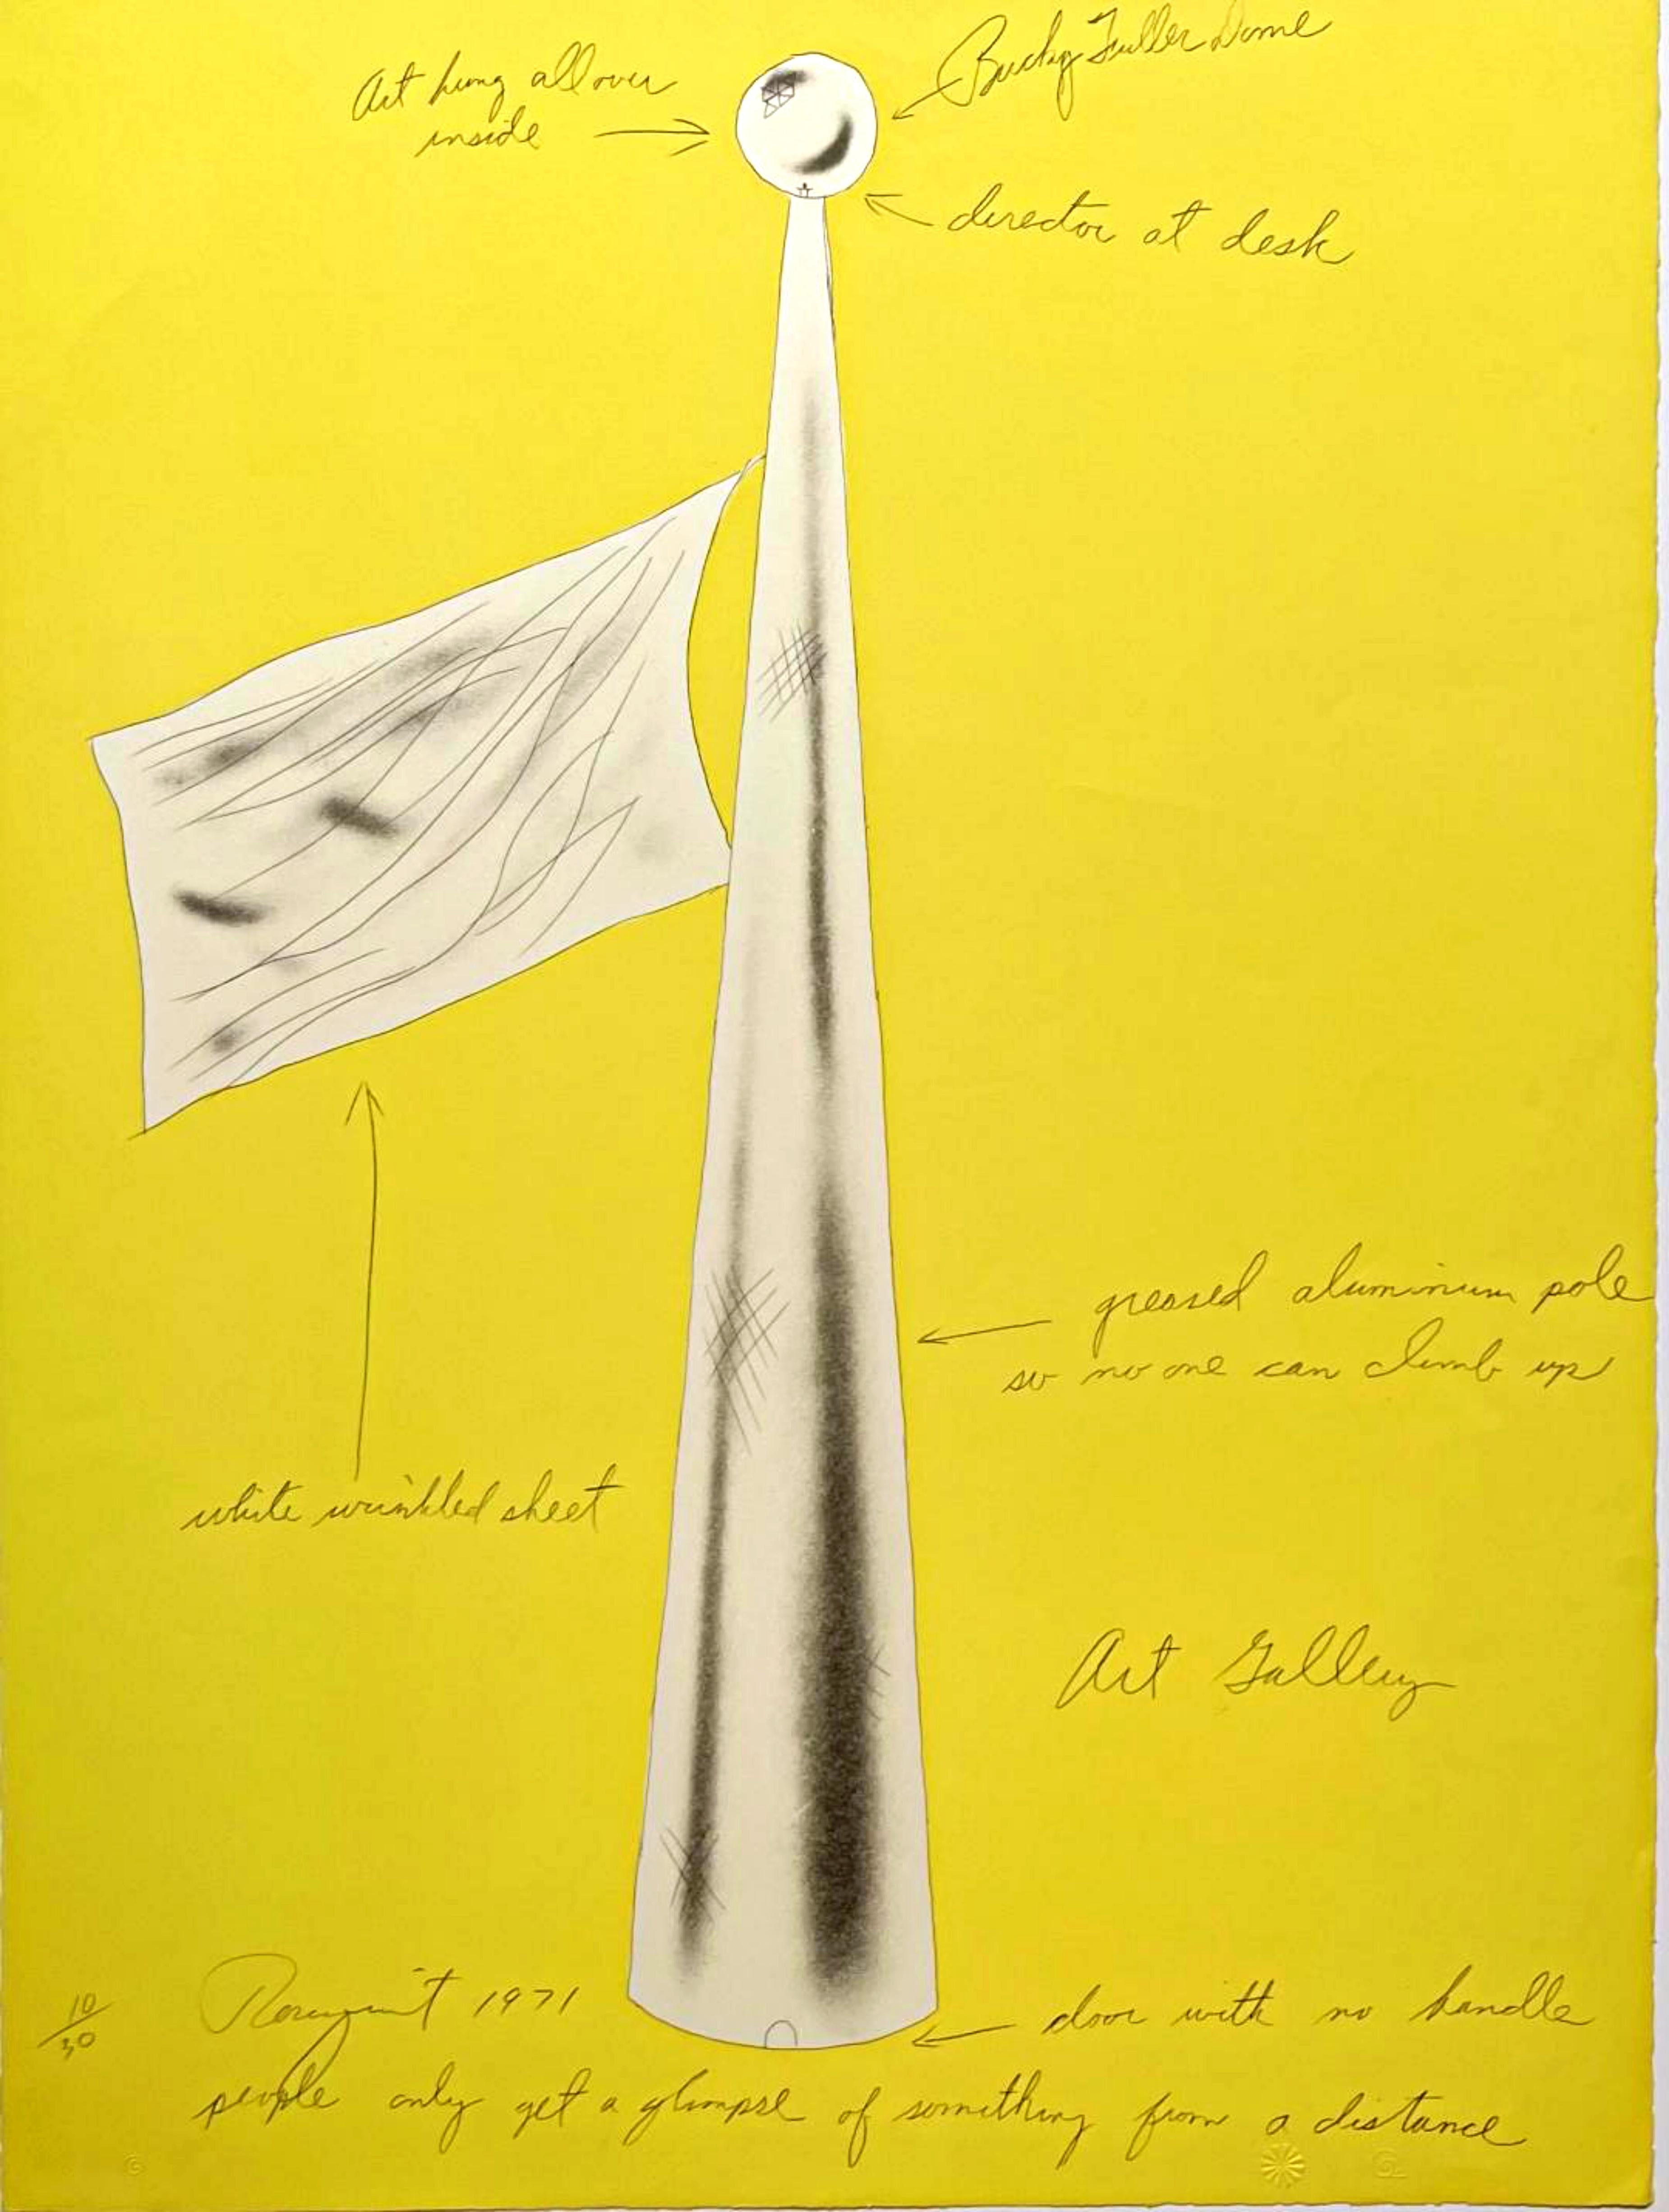 James Rosenquist - Art Gallery, from the Estate of Nina Castelli and Ileana  Sonnabend For Sale at 1stDibs